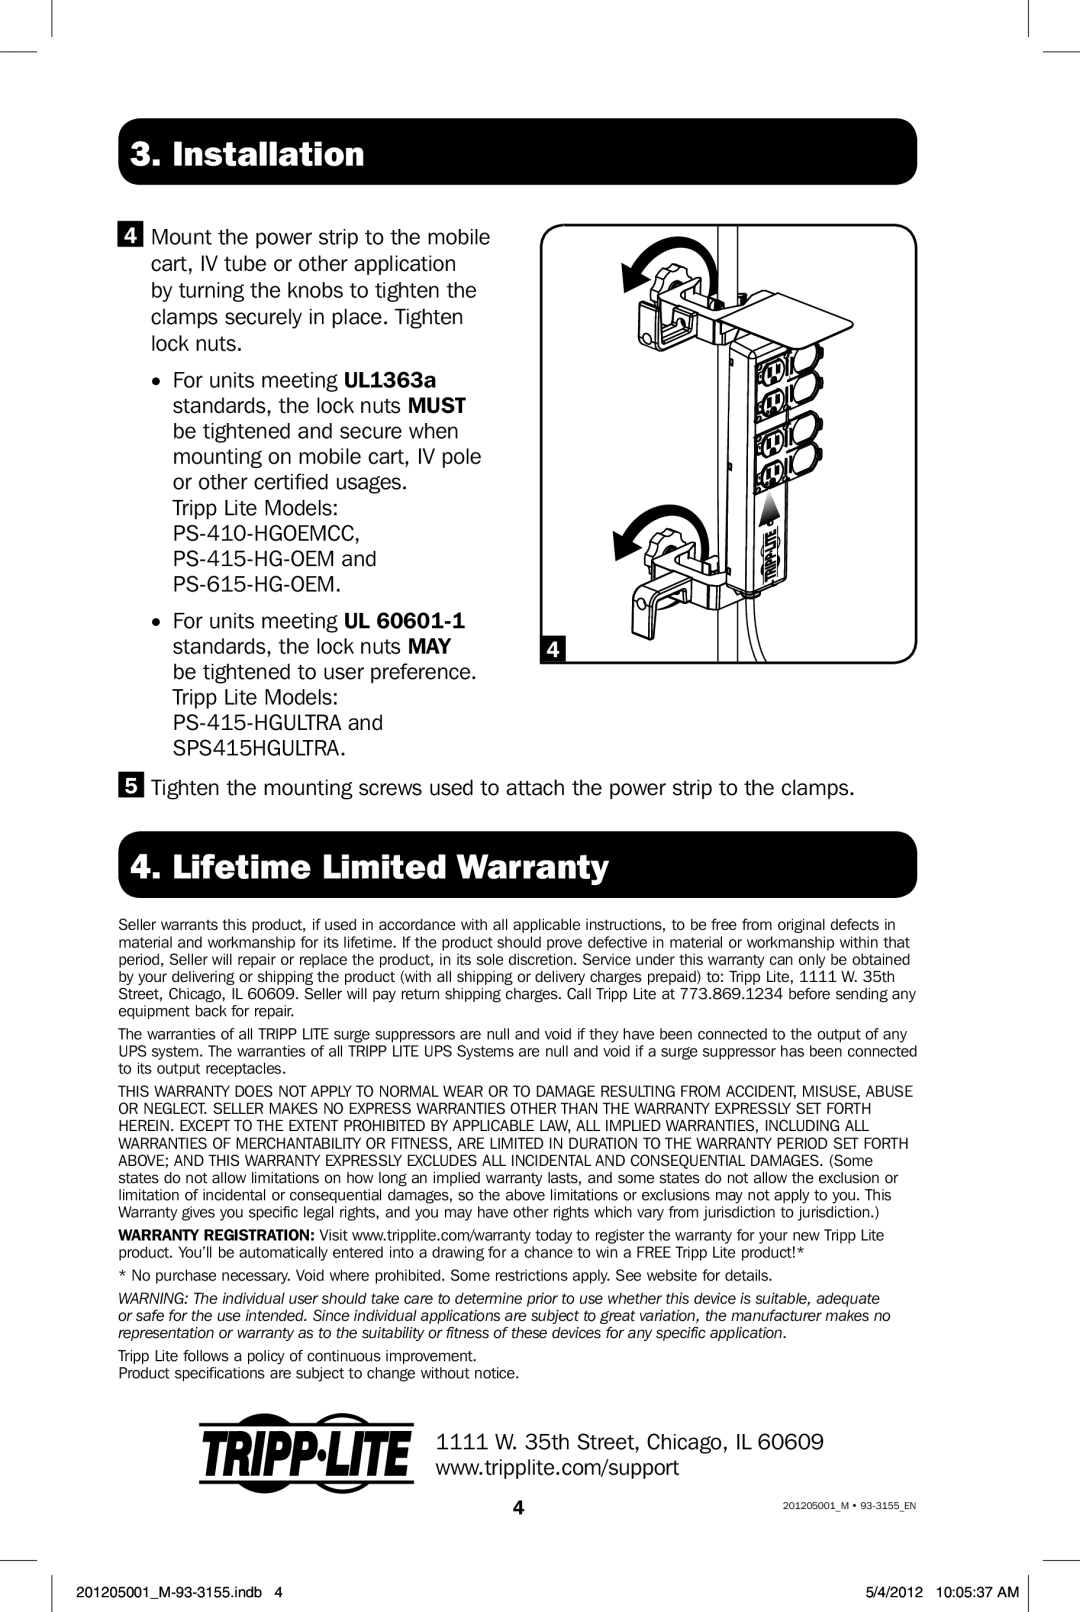 Tripp Lite PSCLAMP owner manual Lifetime Limited Warranty, Installation, PS-415-HG-OEM and PS-615-HG-OEM 